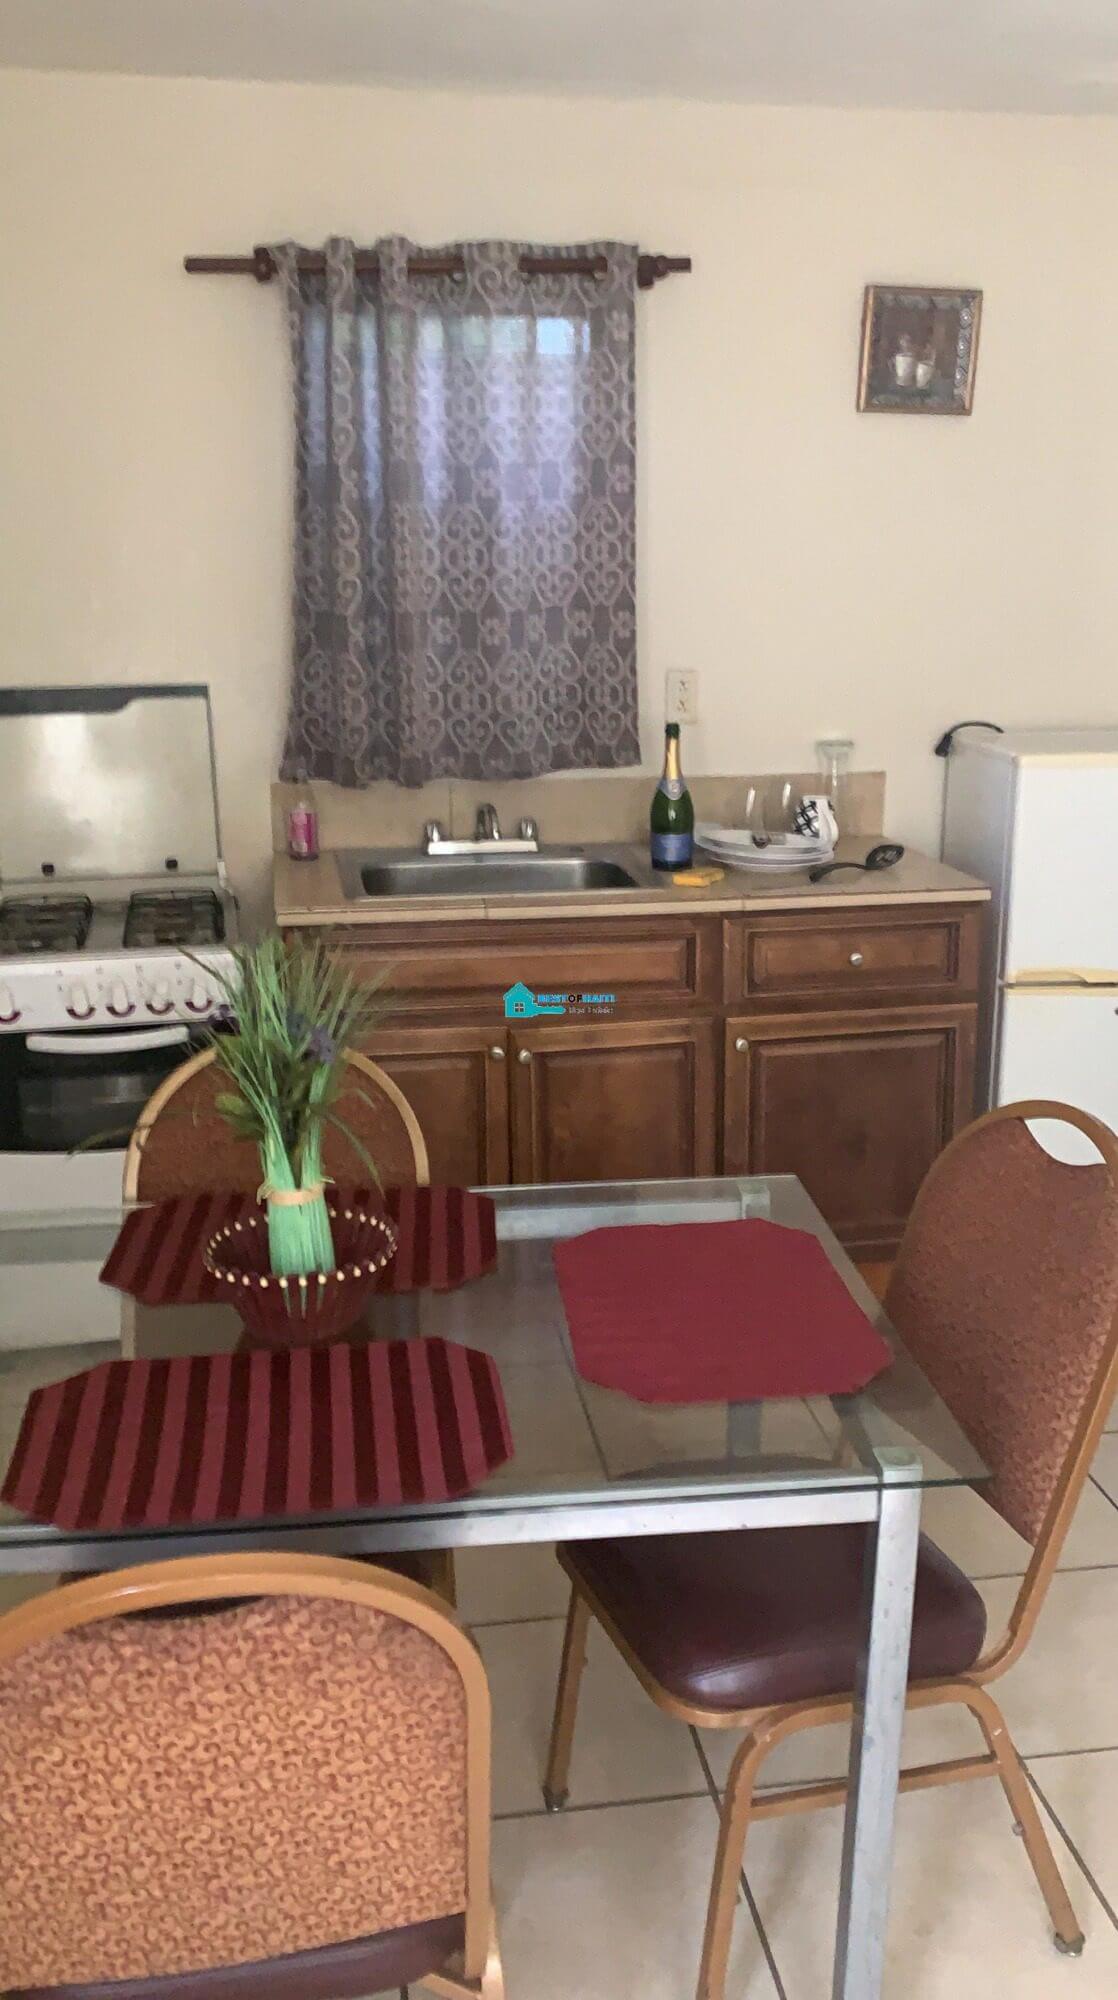 Modest, Fully Furnished Apartment for Rent in Juvernat, Petion-ville, Haiti